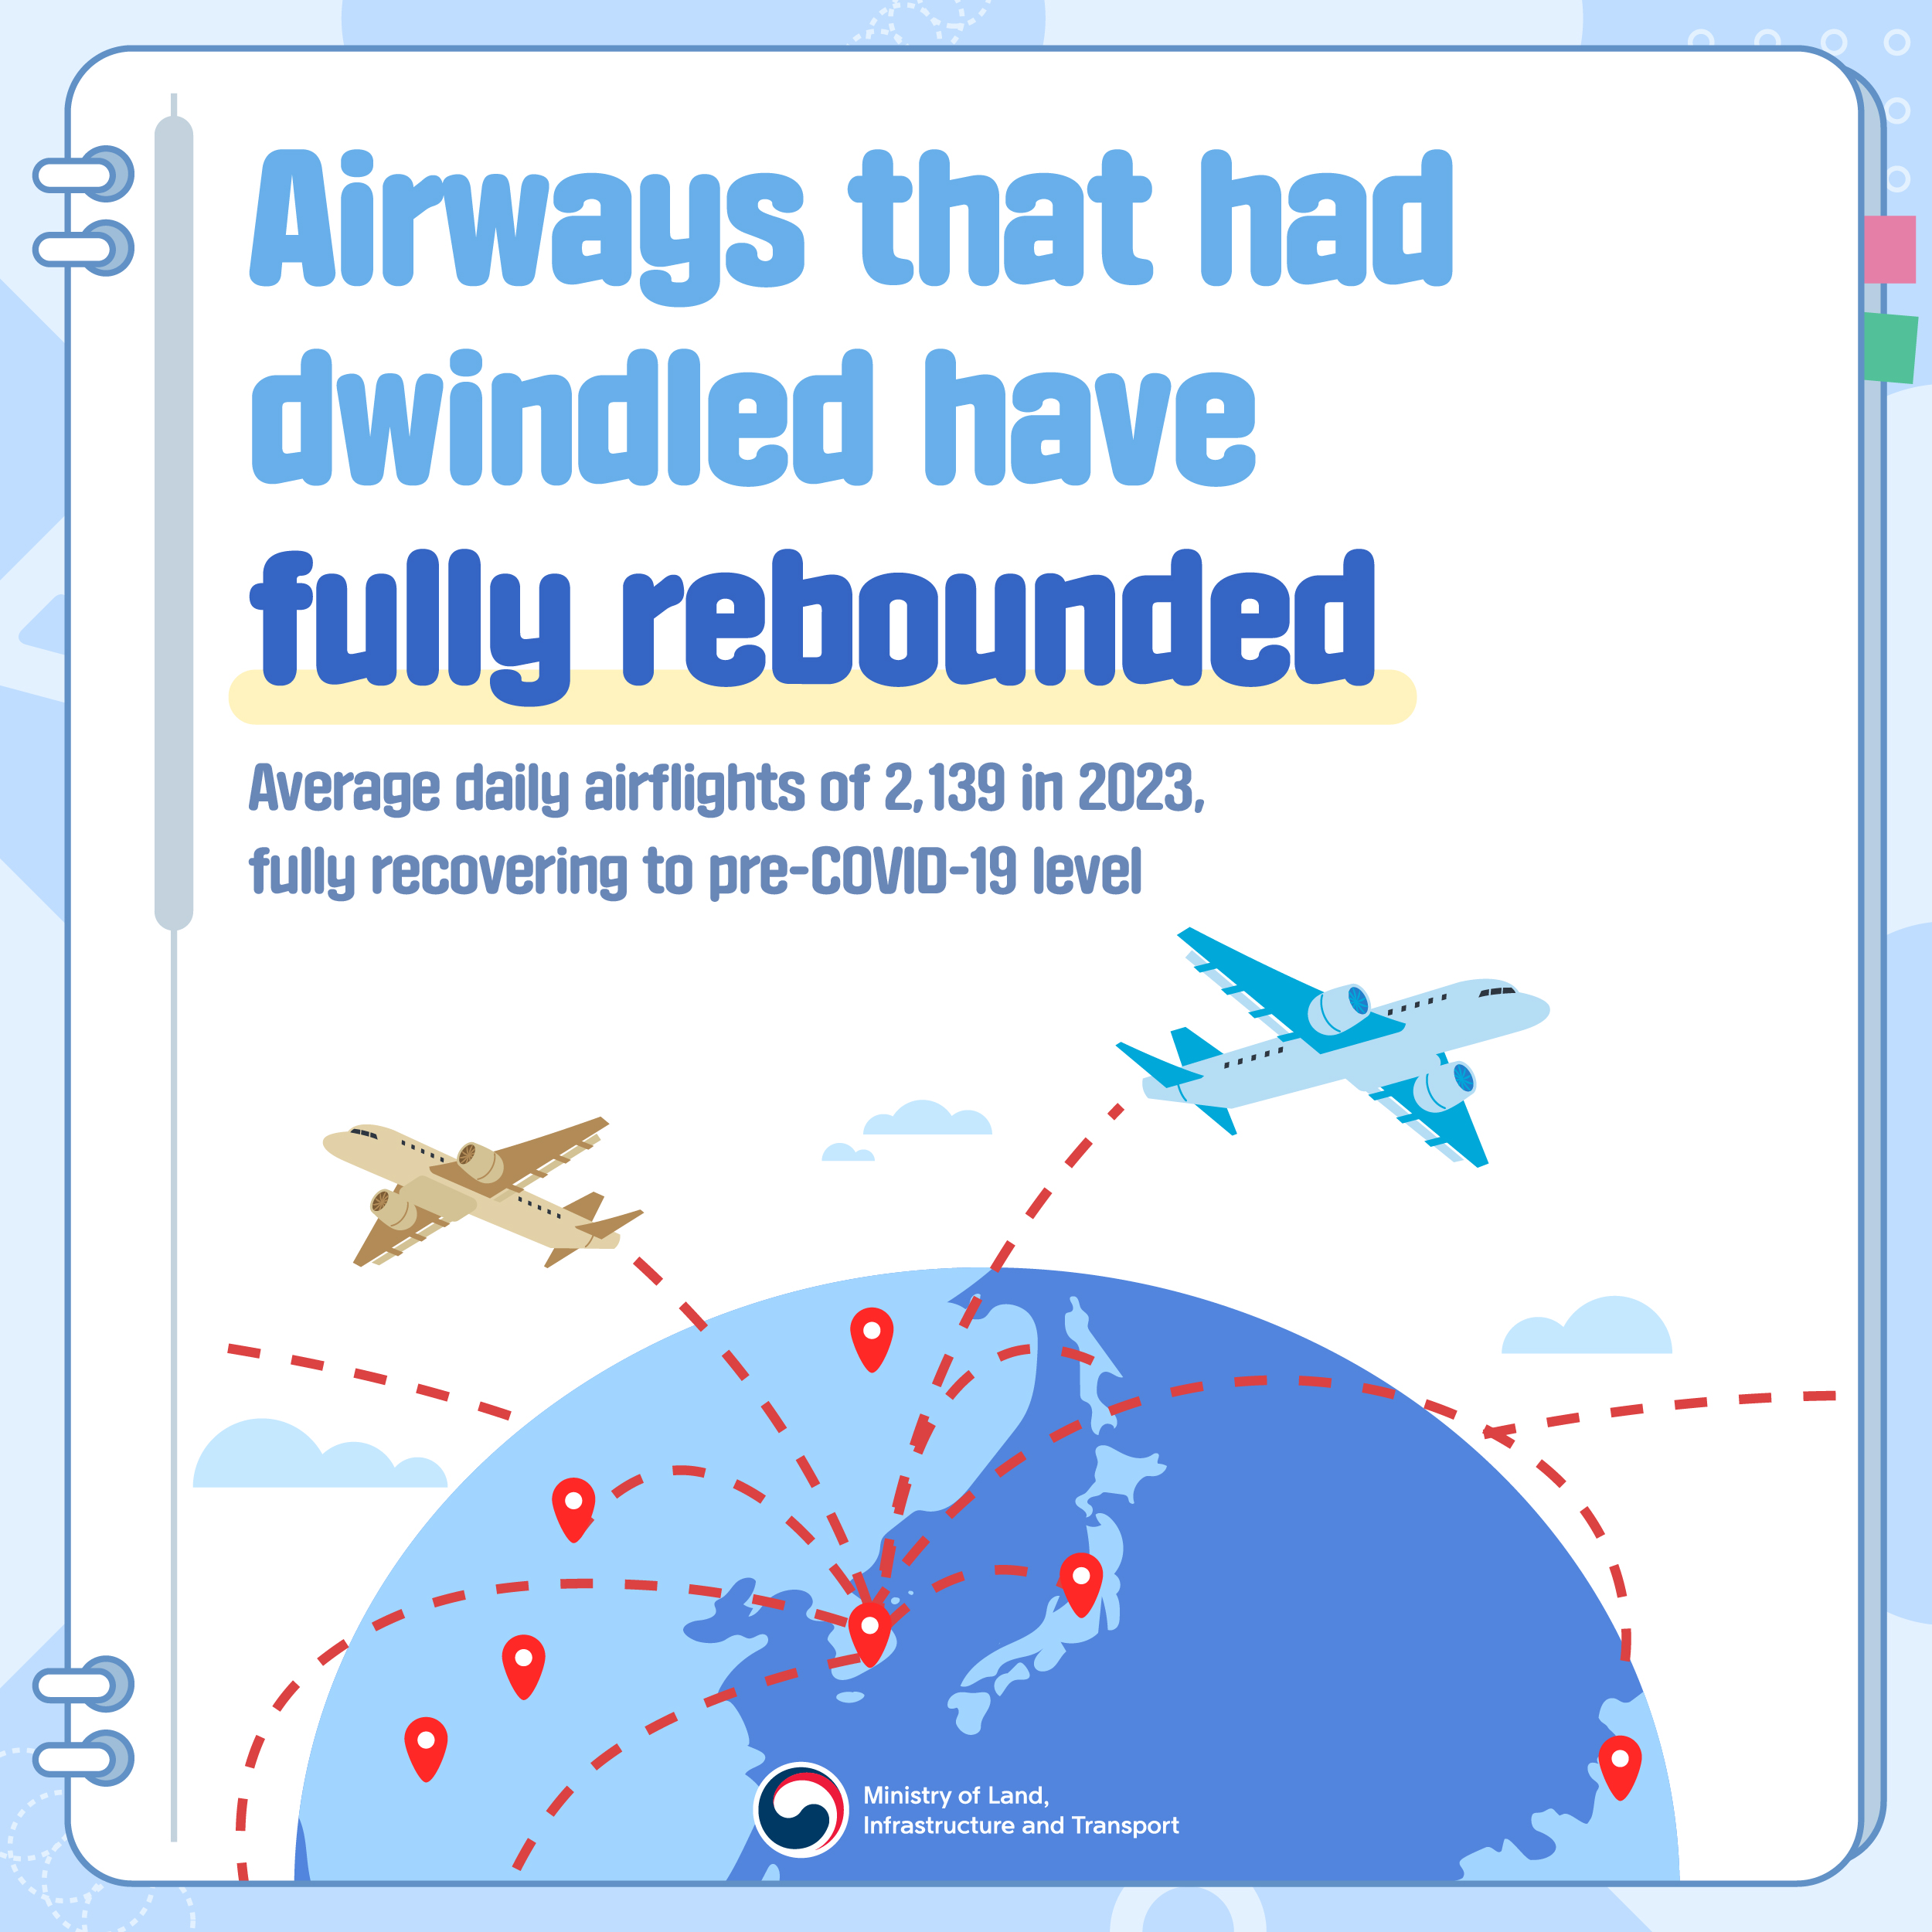 pic 1. Airways that had dwindled have fully rebounded - Average daily airflights of 2,139 in 2023, fully recovering to pre-COVID-19 level